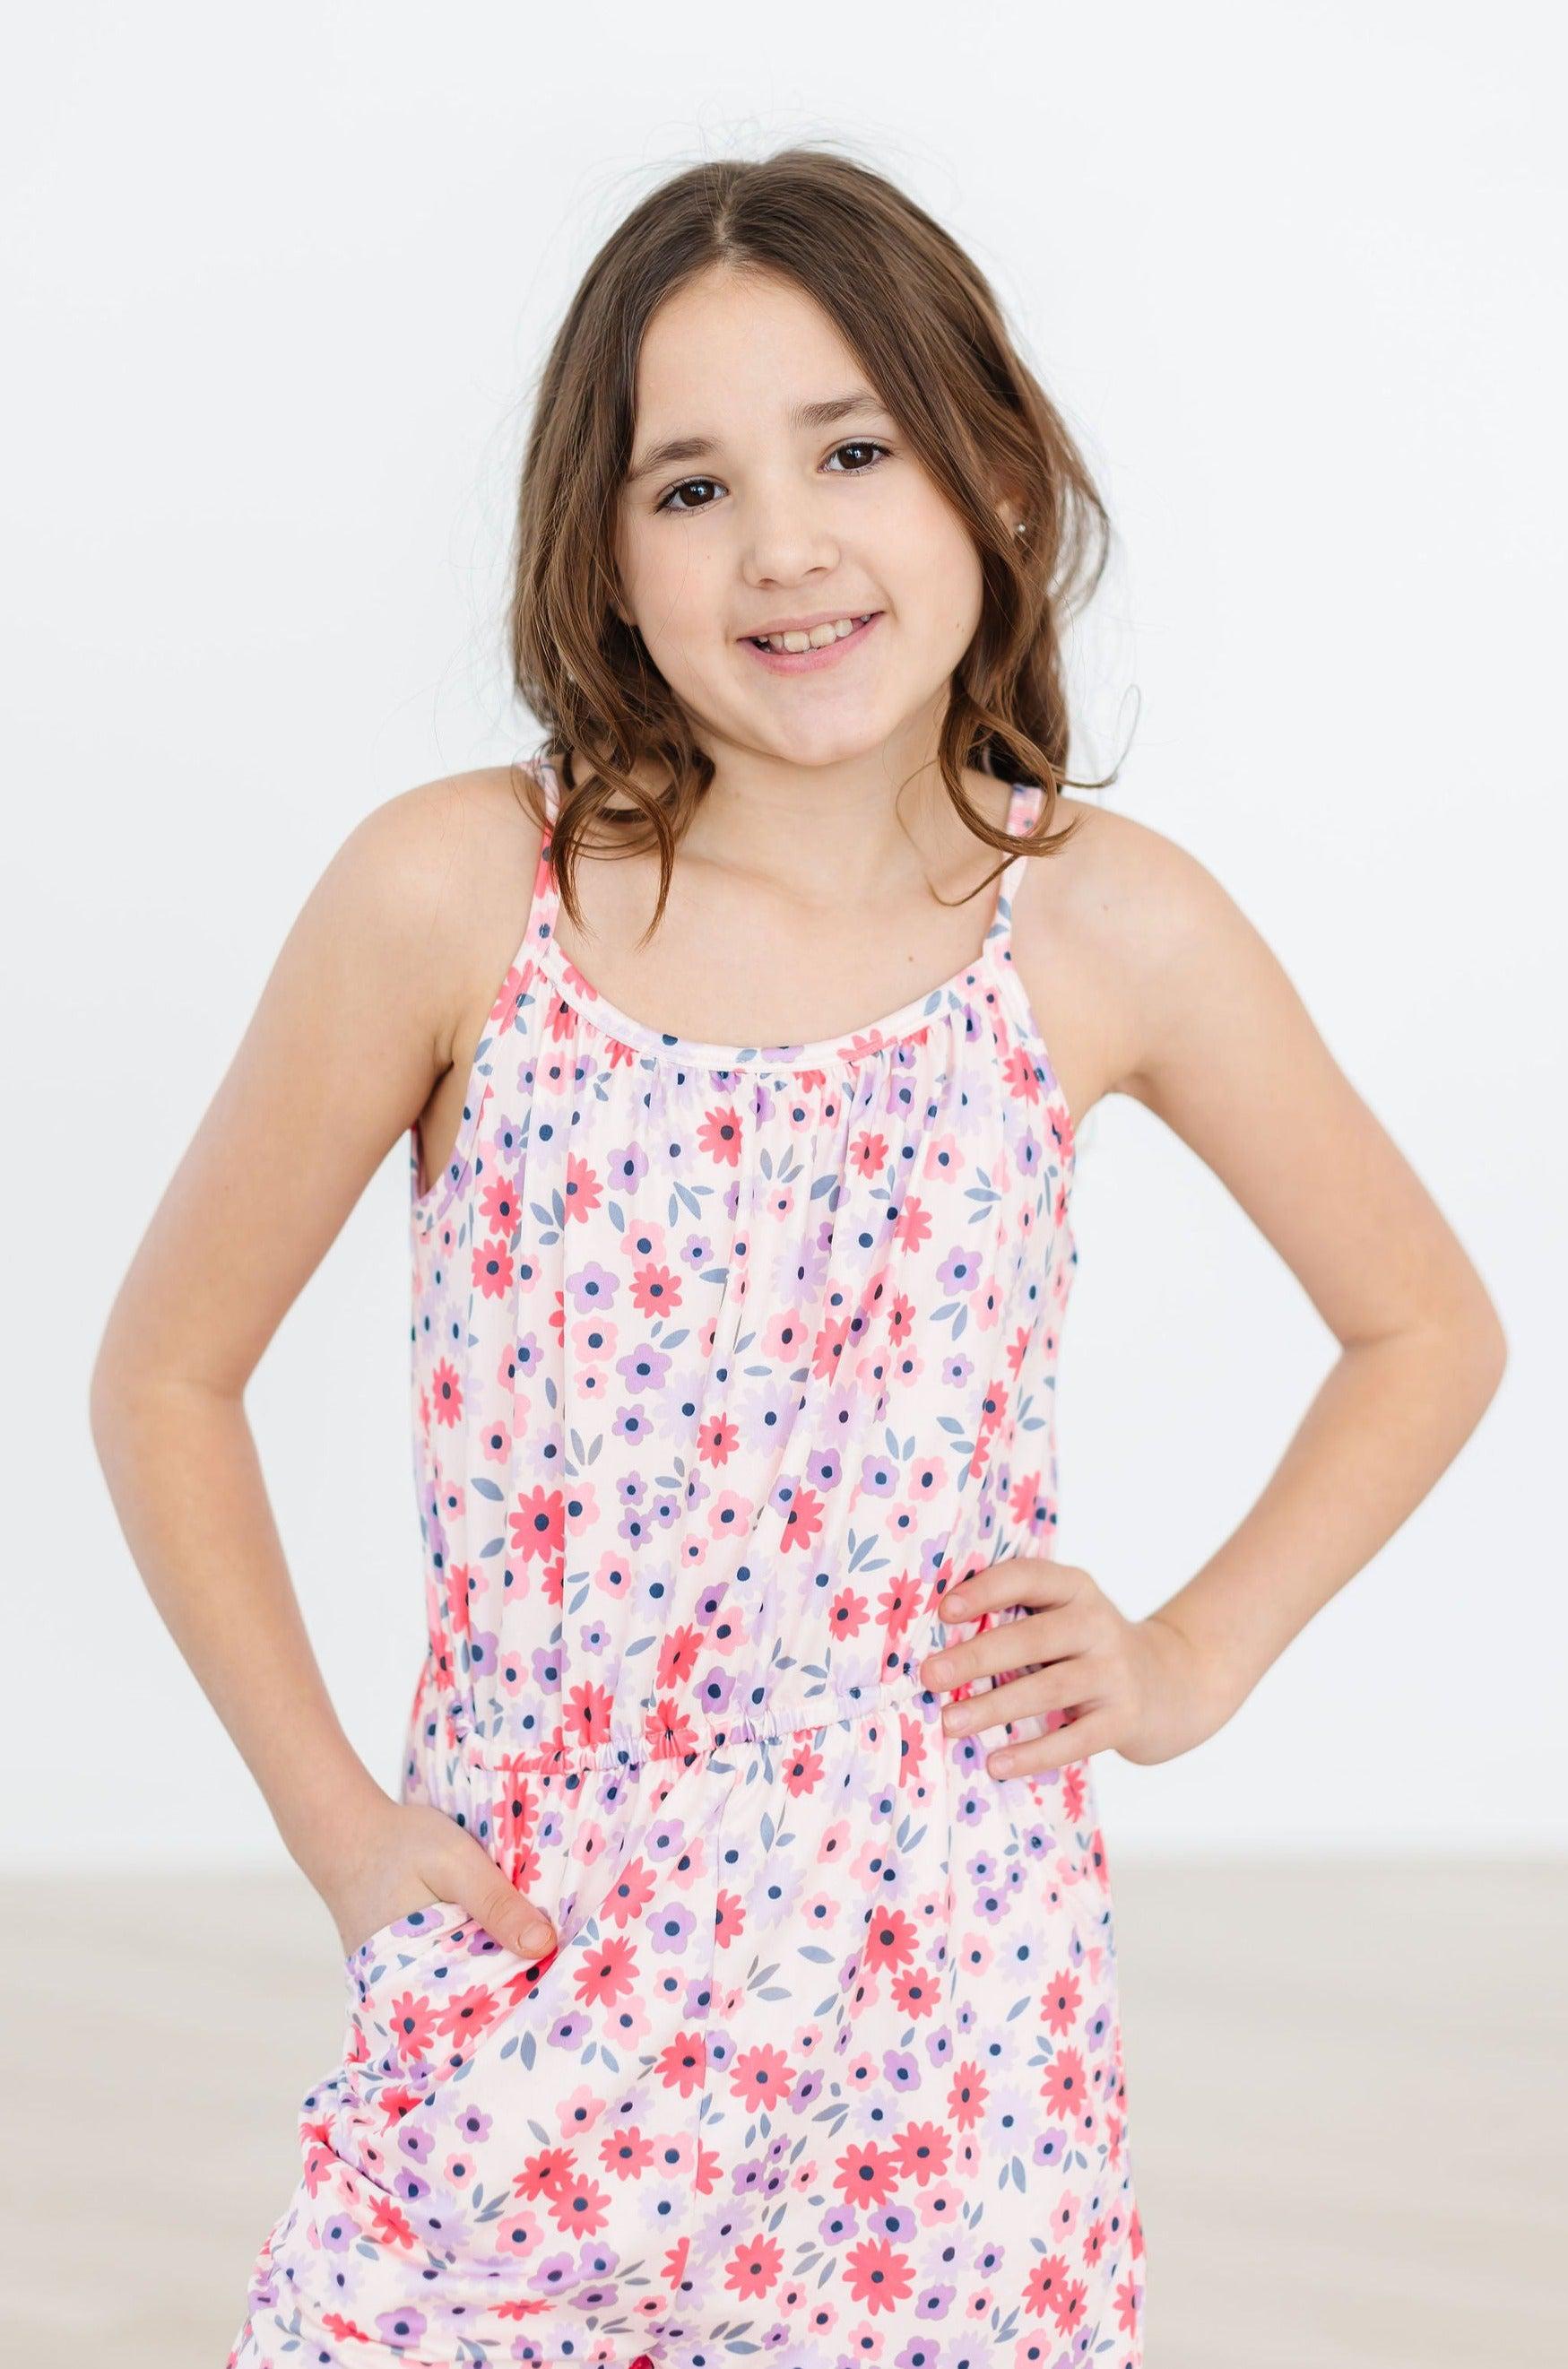 Buttercup Strappy Play Romper-Mila & Rose ®